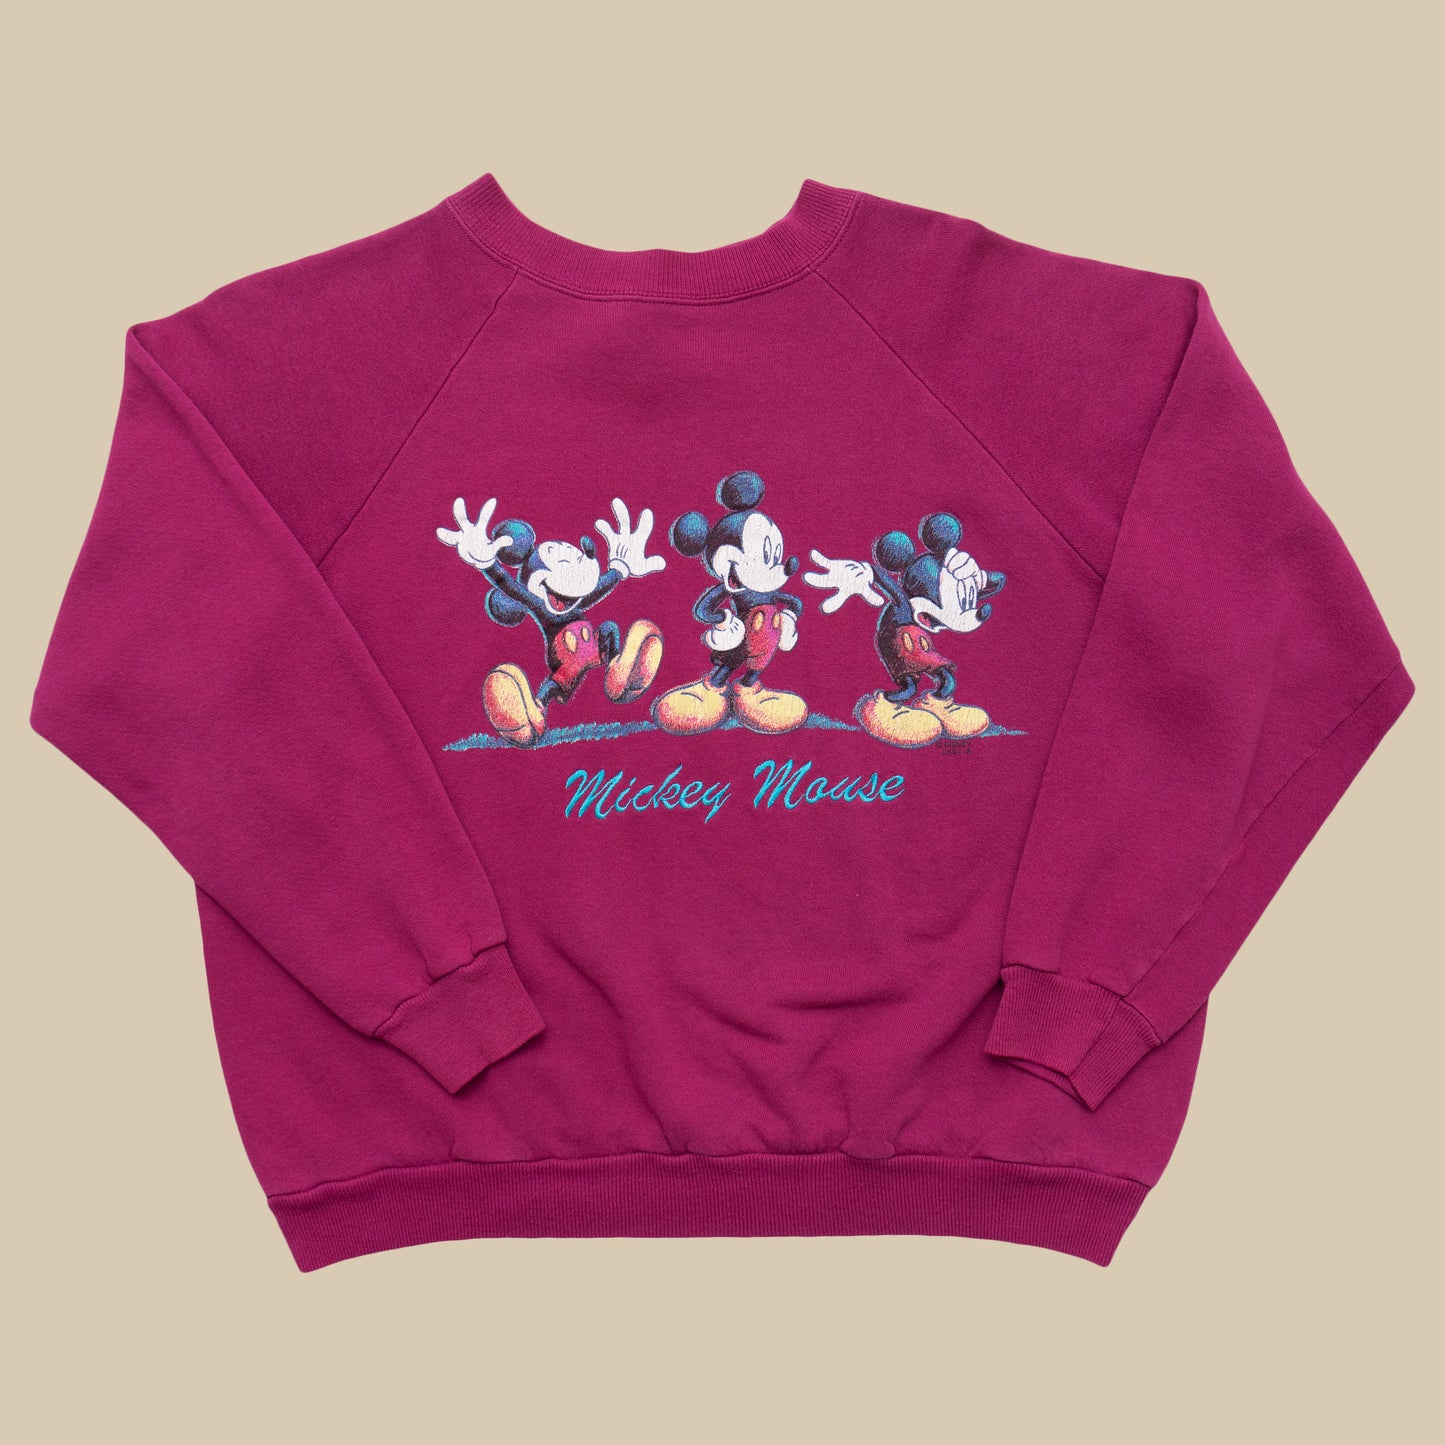 Mickey Mouse Sweater, M